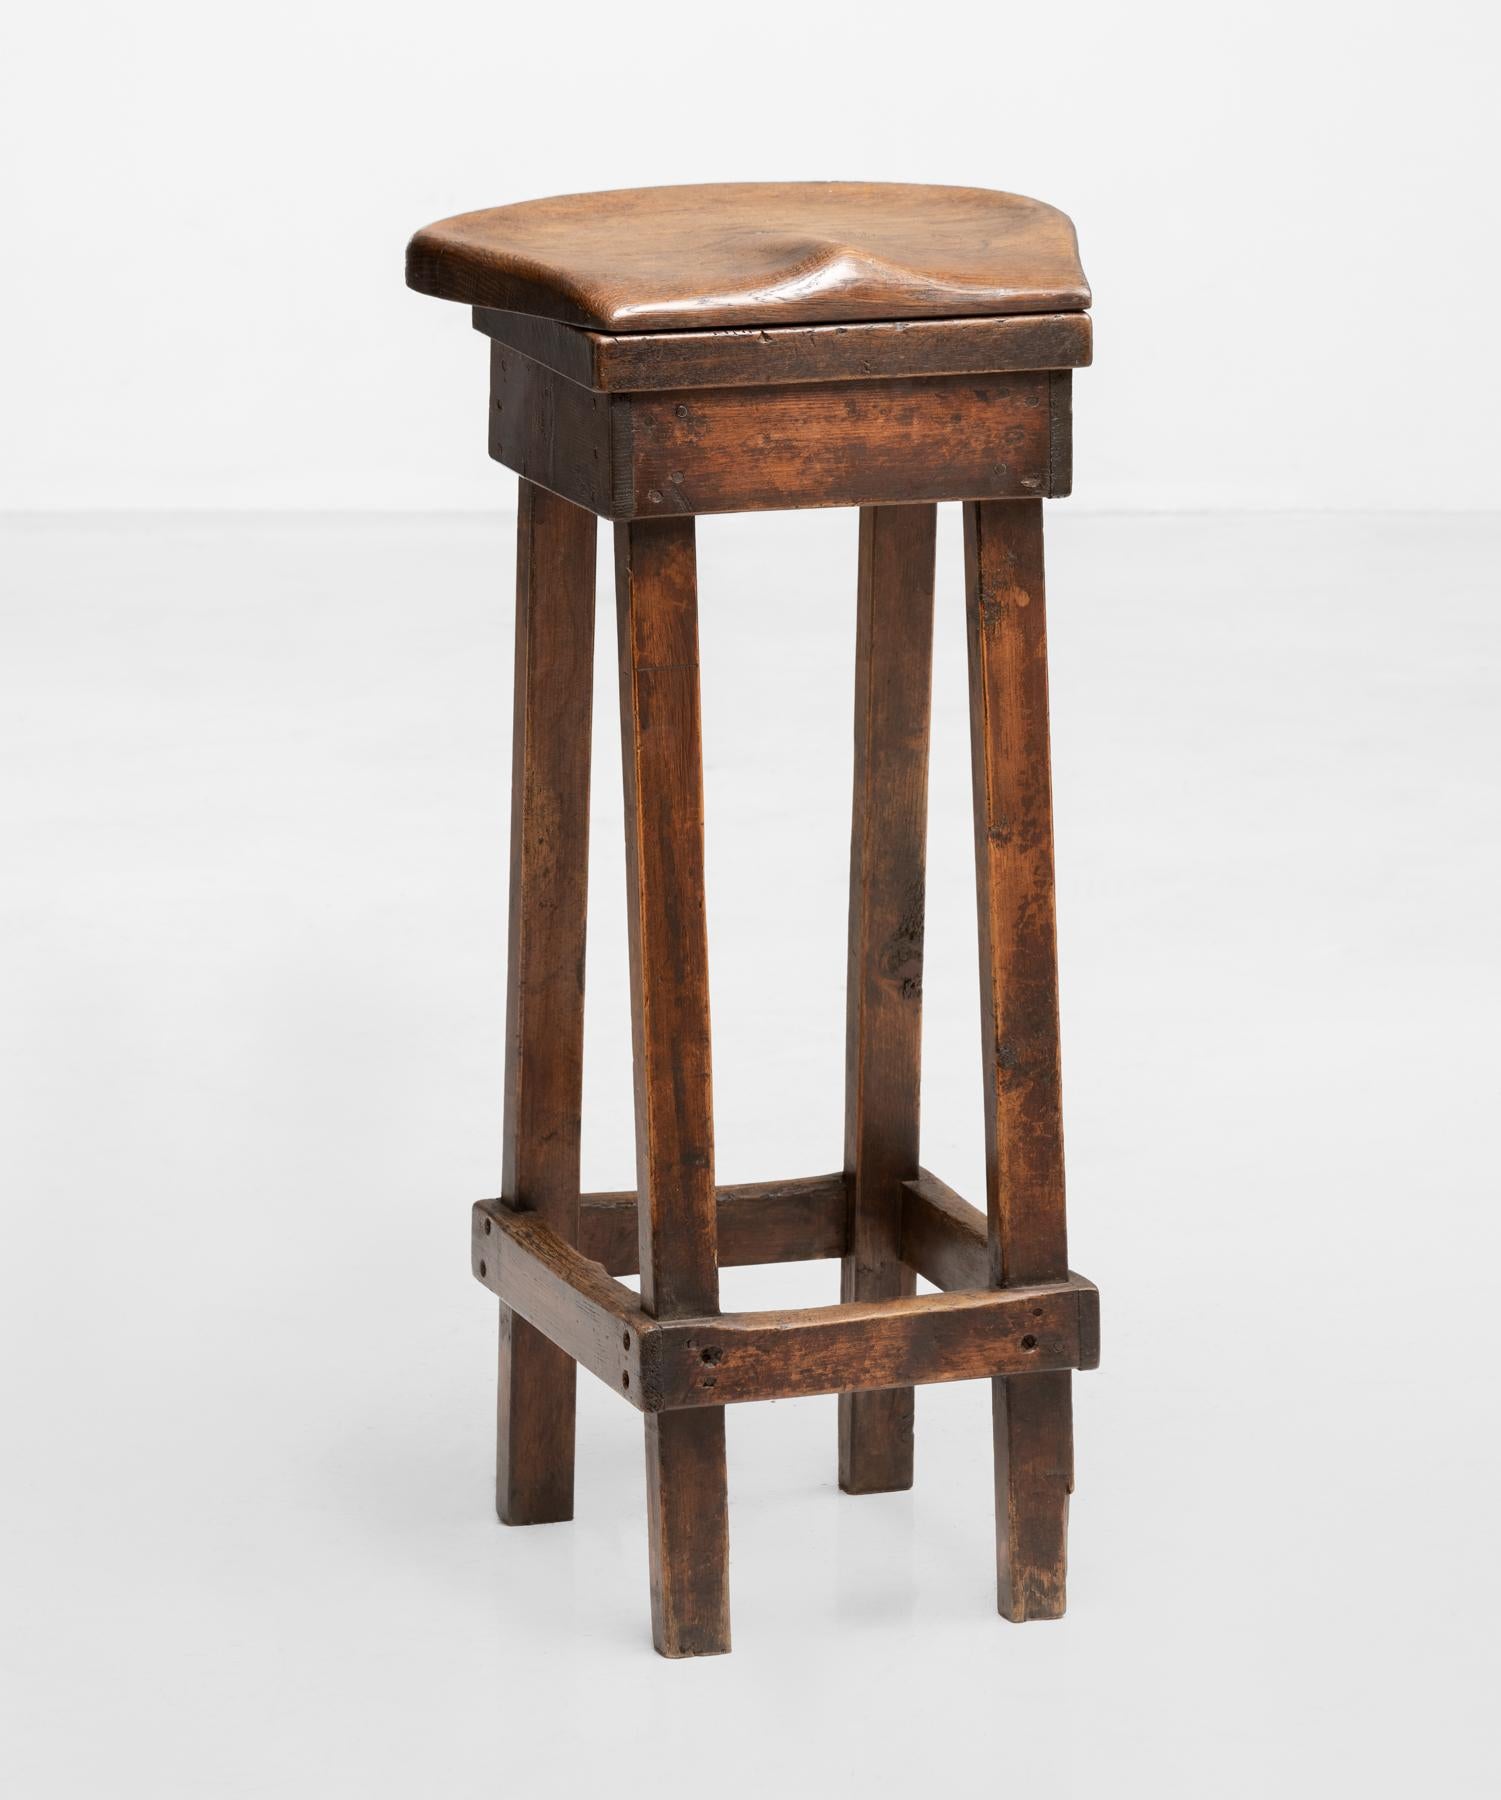 Oak & Pine Shop Stool, England, circa 1920

Simple form with carved, swiveling seat.